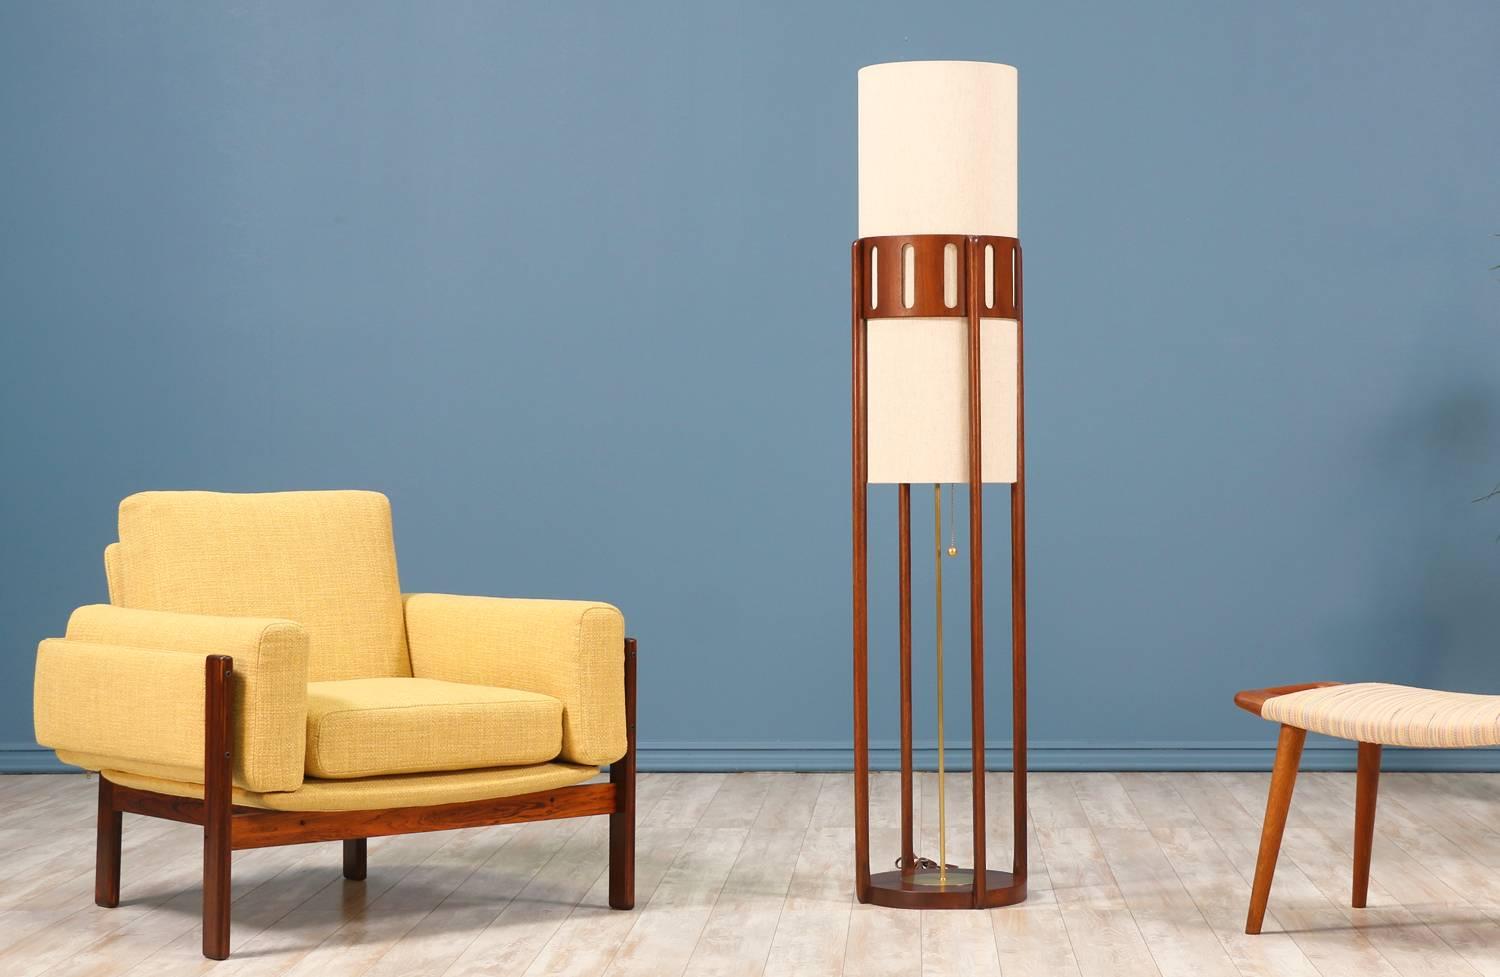 Mid-Century Modern floor lamp designed and manufactured by Modeline of California in the United States circa 1960’s. This tall cylindrical lamp features four pillars on a rounded base and carved wood detailing at the top that support a linen shade.